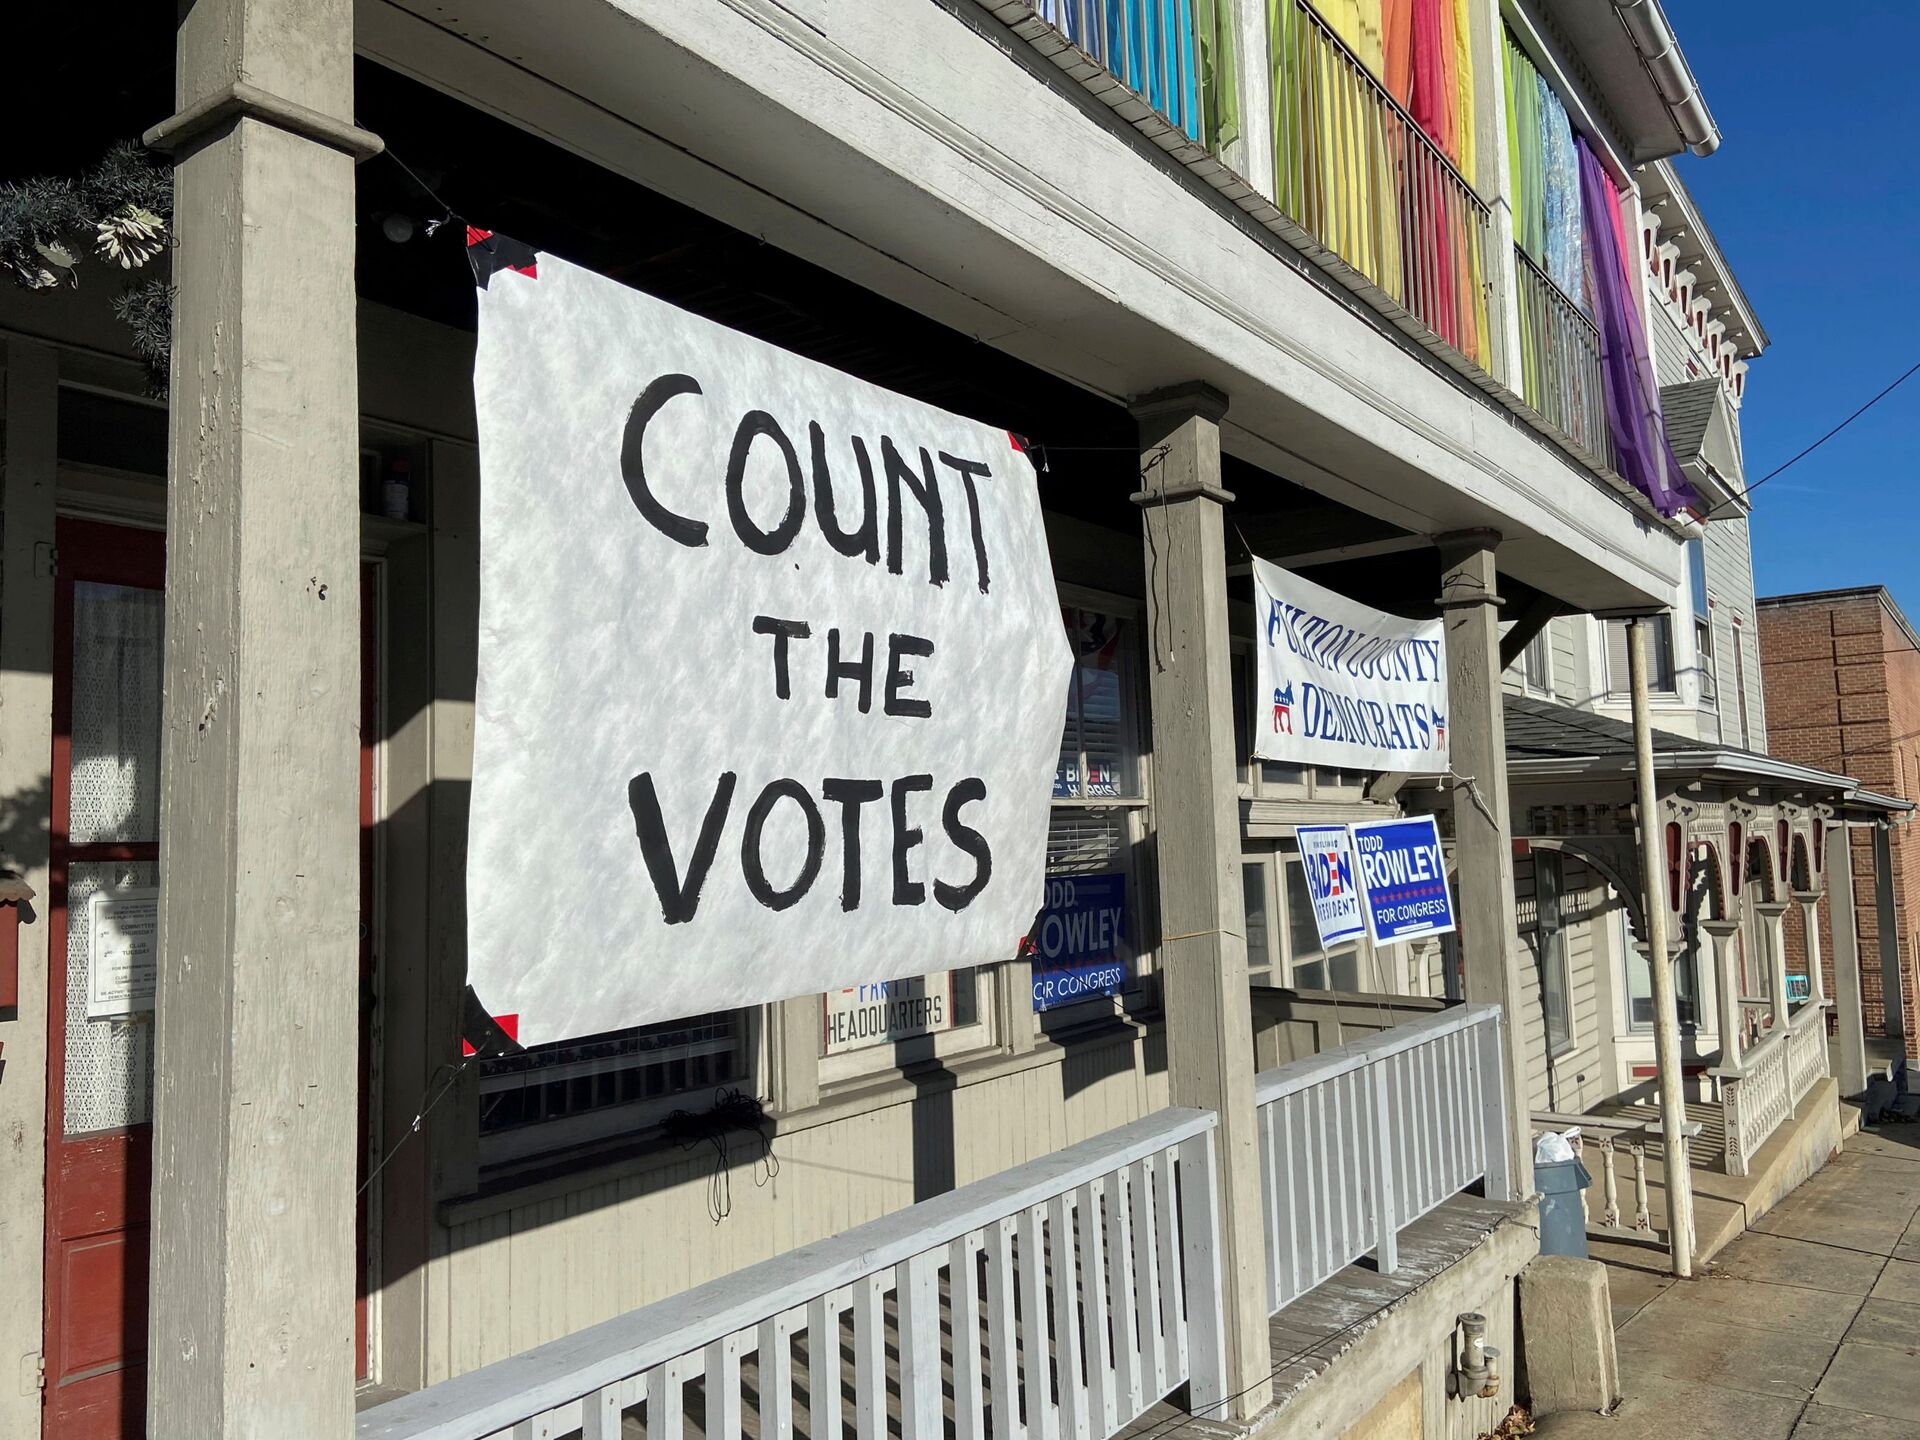 A sign urging people to vote is seen on the porch of the Democratic Party's Fulton County headquarters on Election Day in McConnellsburg, Pennsylvania November 3, 2020. Picture taken November 3, 2020. - Sputnik International, 1920, 09.09.2021